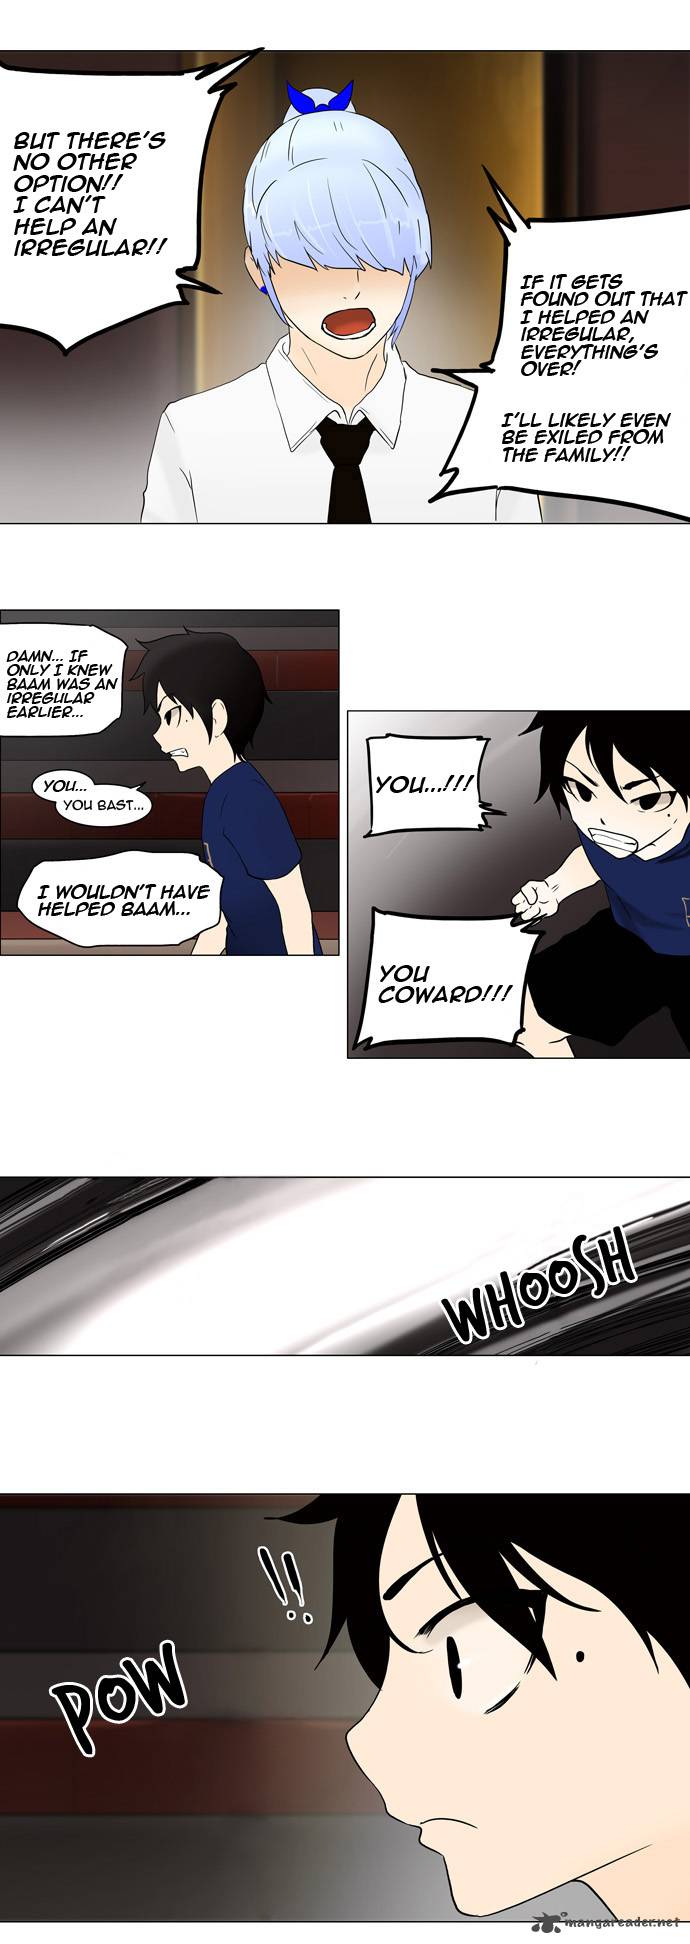 Tower Of God 58 29